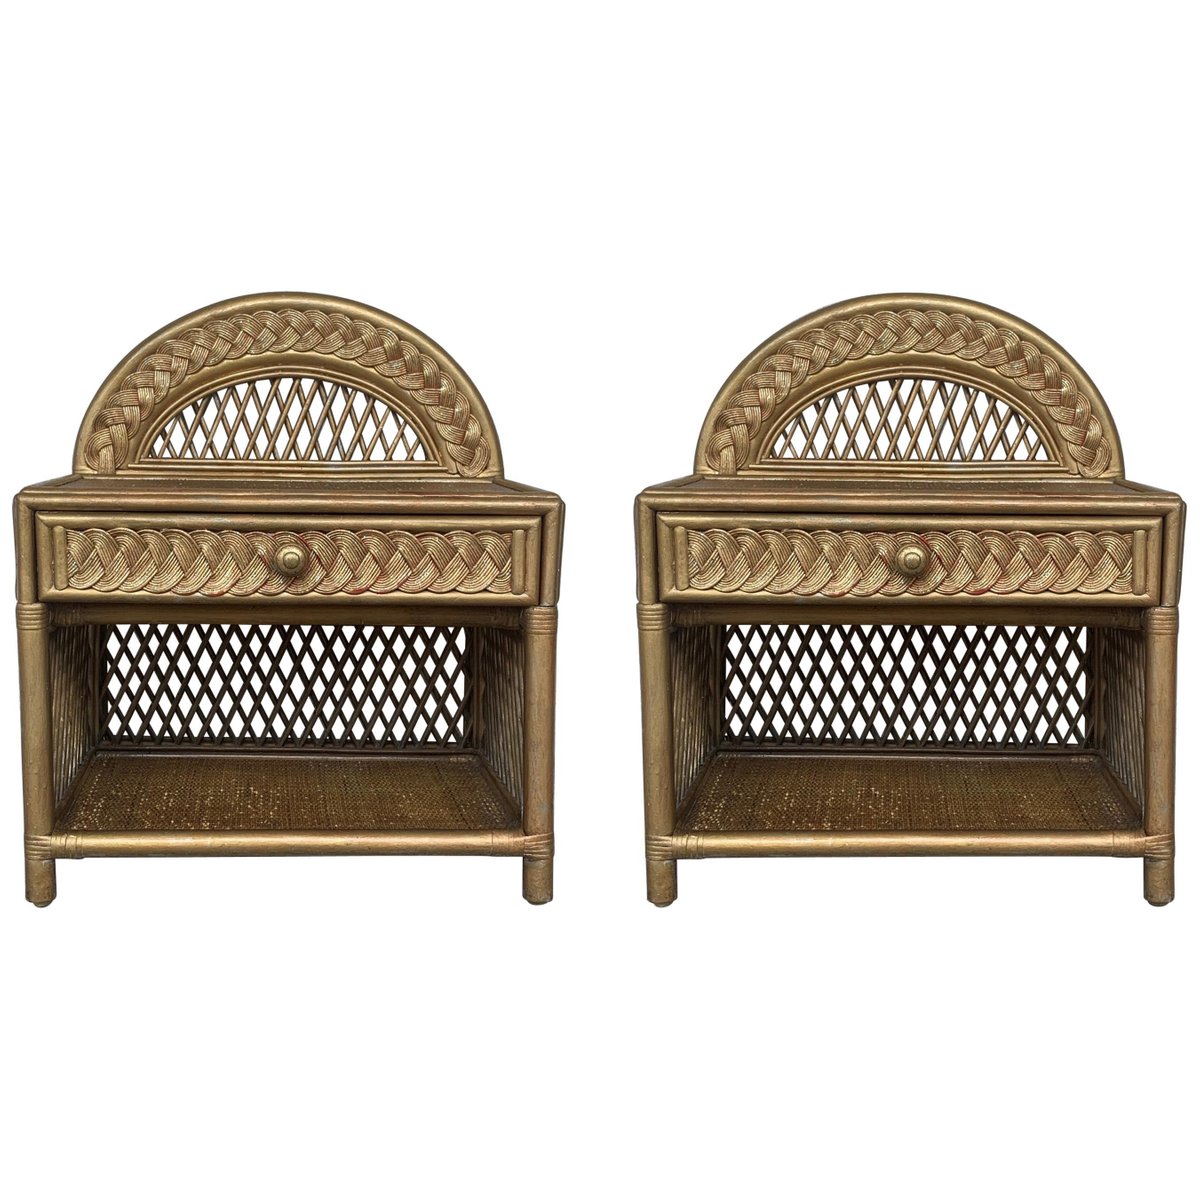 mid century bamboo rattan gold nightstands with drawer and low shelves set of 2 PSK-1002532